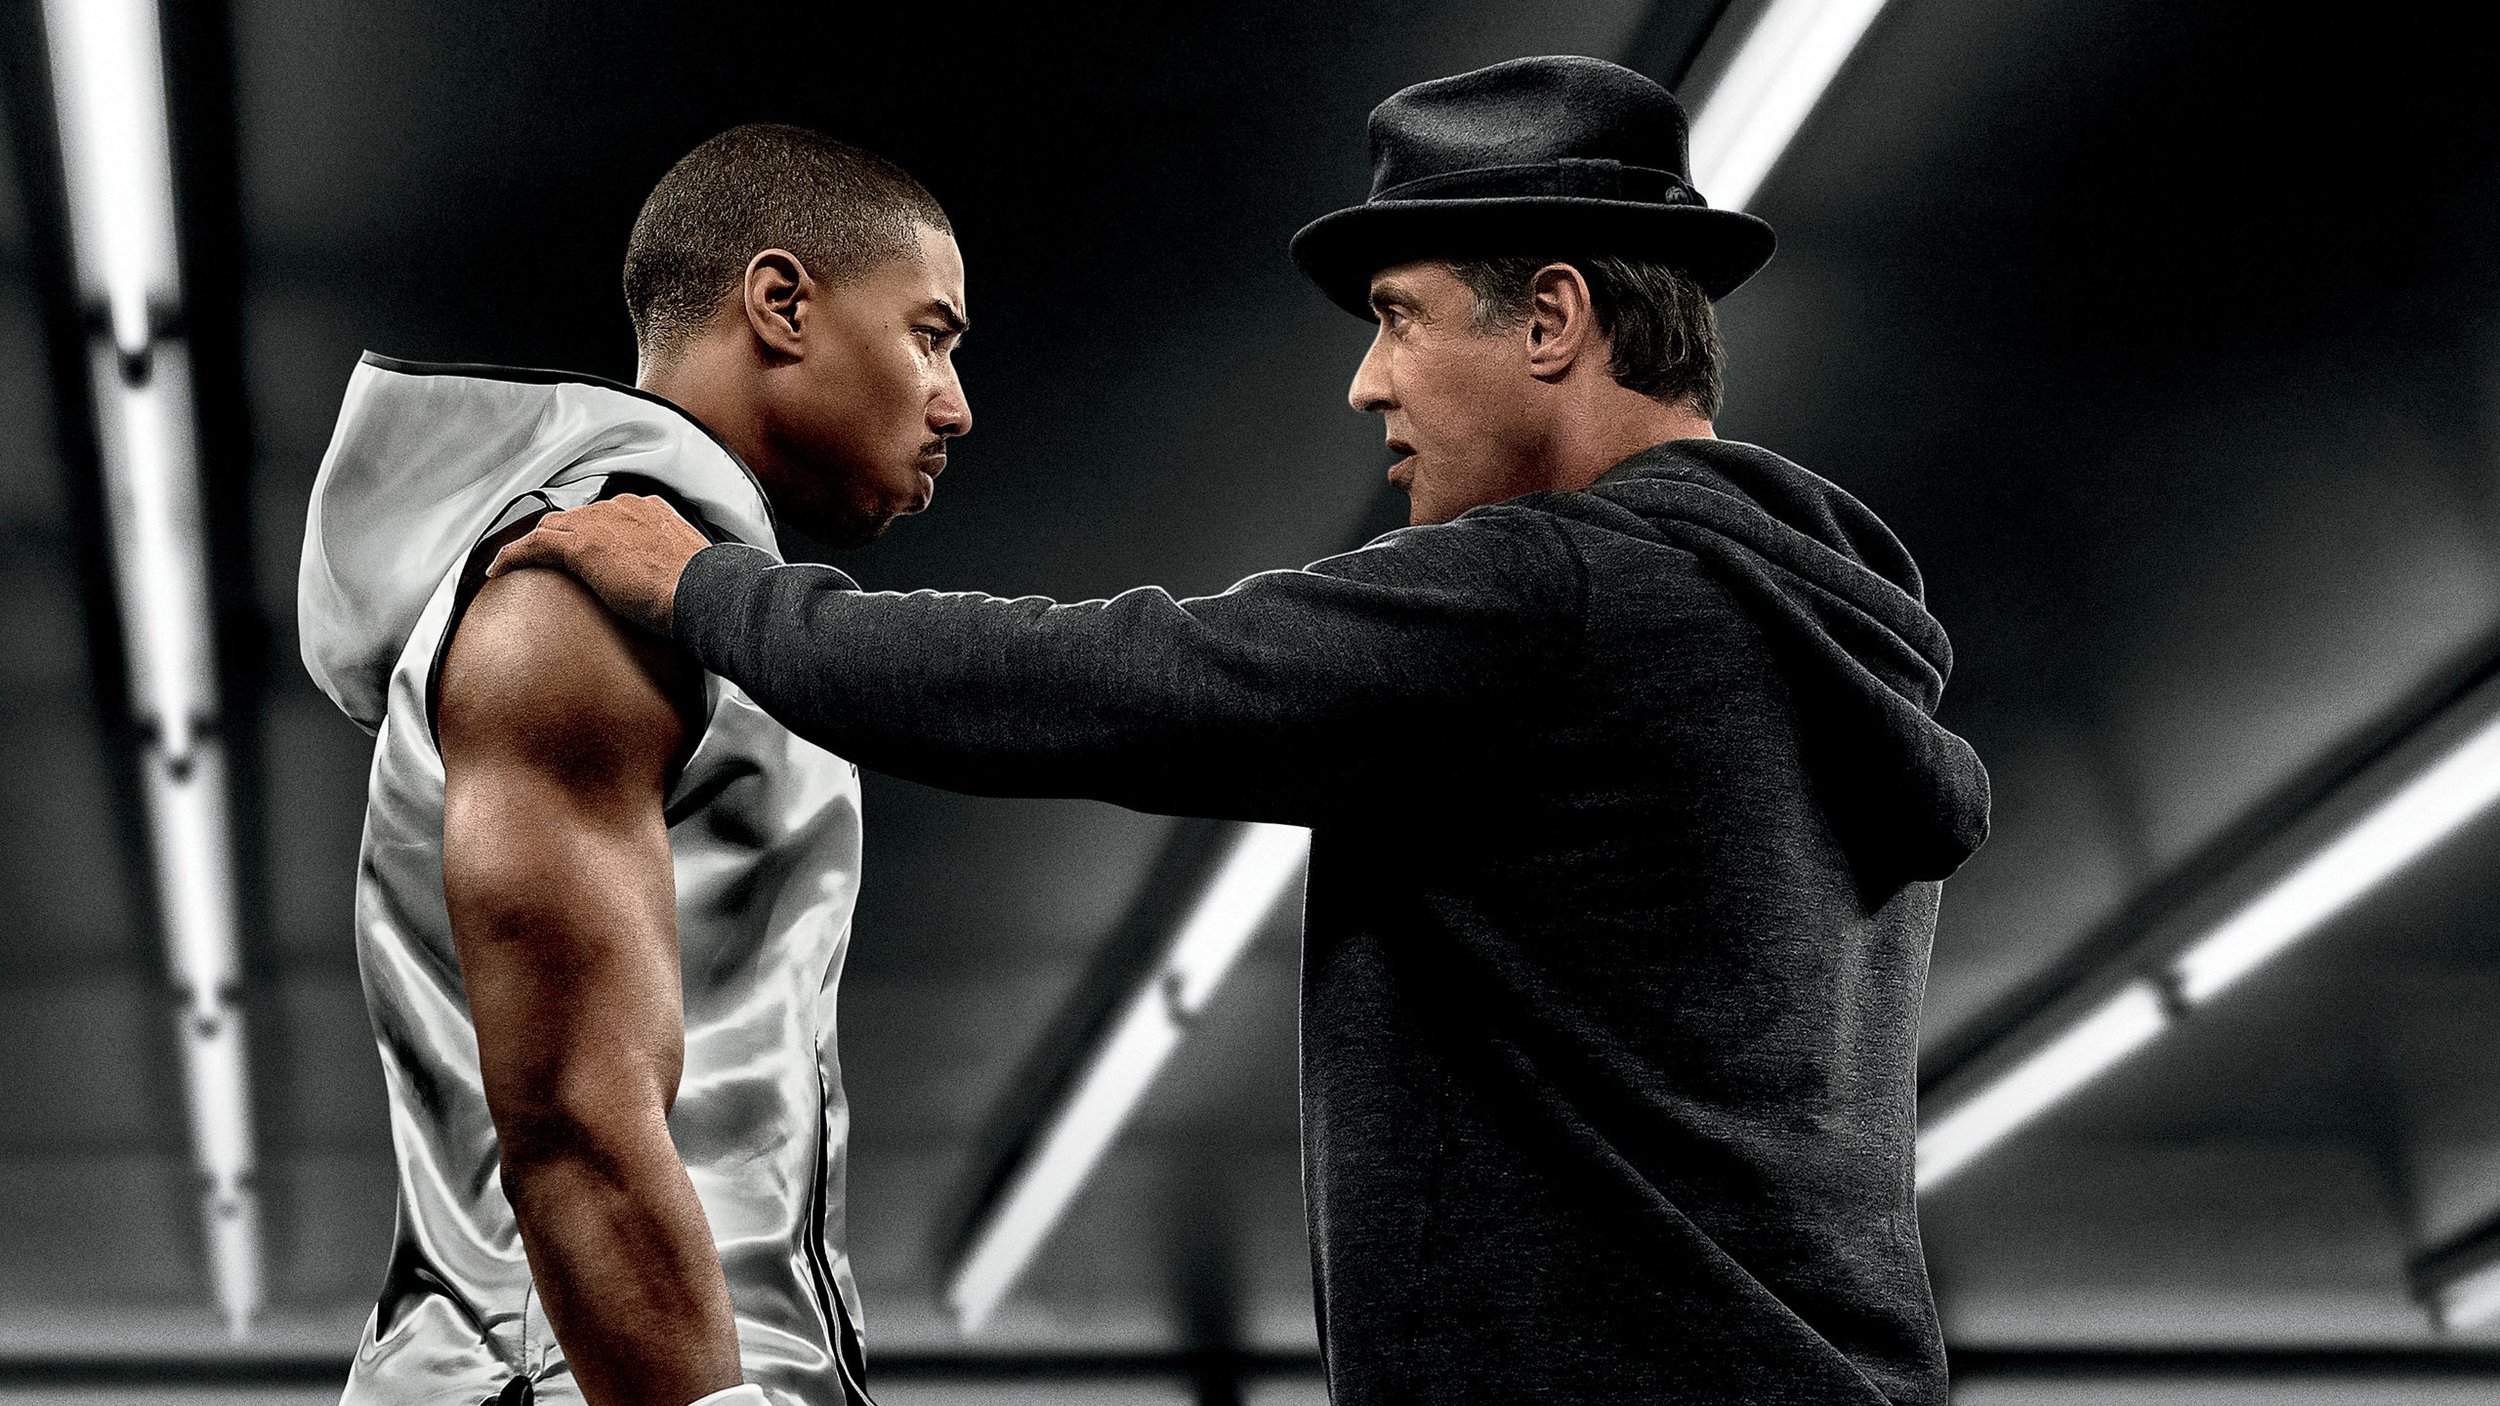 <p>The “Rocky” series had really hit a dead end and seemed all but done. So it was decided it would get a reboot focusing on a different boxer. Michael B. Jordan was hired for the role of Adonis Creed, son of Rocky’s friend, foe and mentor, Apollo Creed. Sylvester Stallone got an Oscar nomination, and a new series was born.</p><p>You may also like: <a href='https://www.yardbarker.com/nba/articles/did_the_right_player_win_the_nba_mvp_award_during_the_lottery_era_031924/s1__38682512'>Did the right player win the NBA MVP award during the lottery era?</a></p>